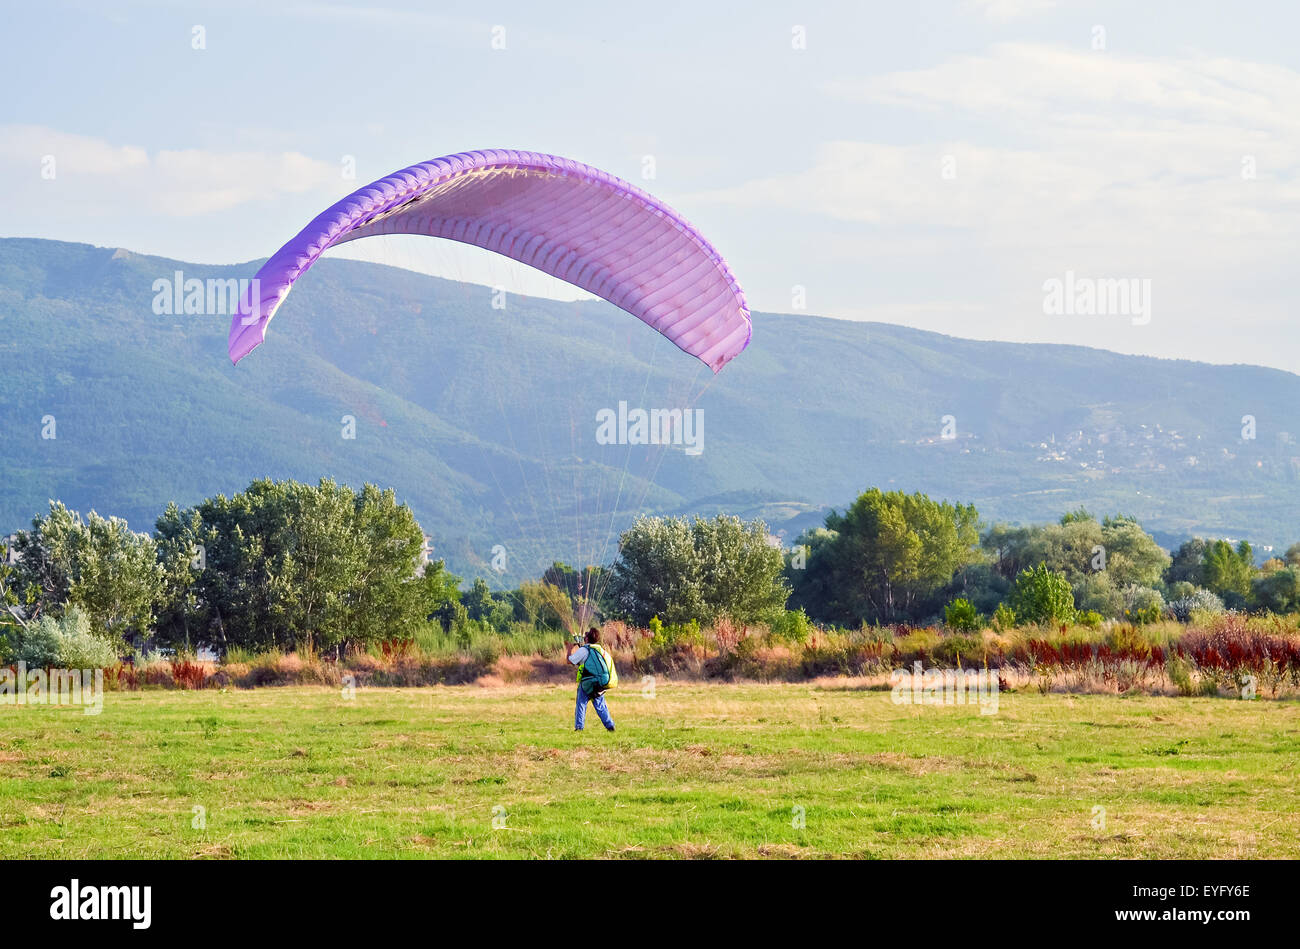 A parachute jumper training at the sports ground against the wind Stock Photo